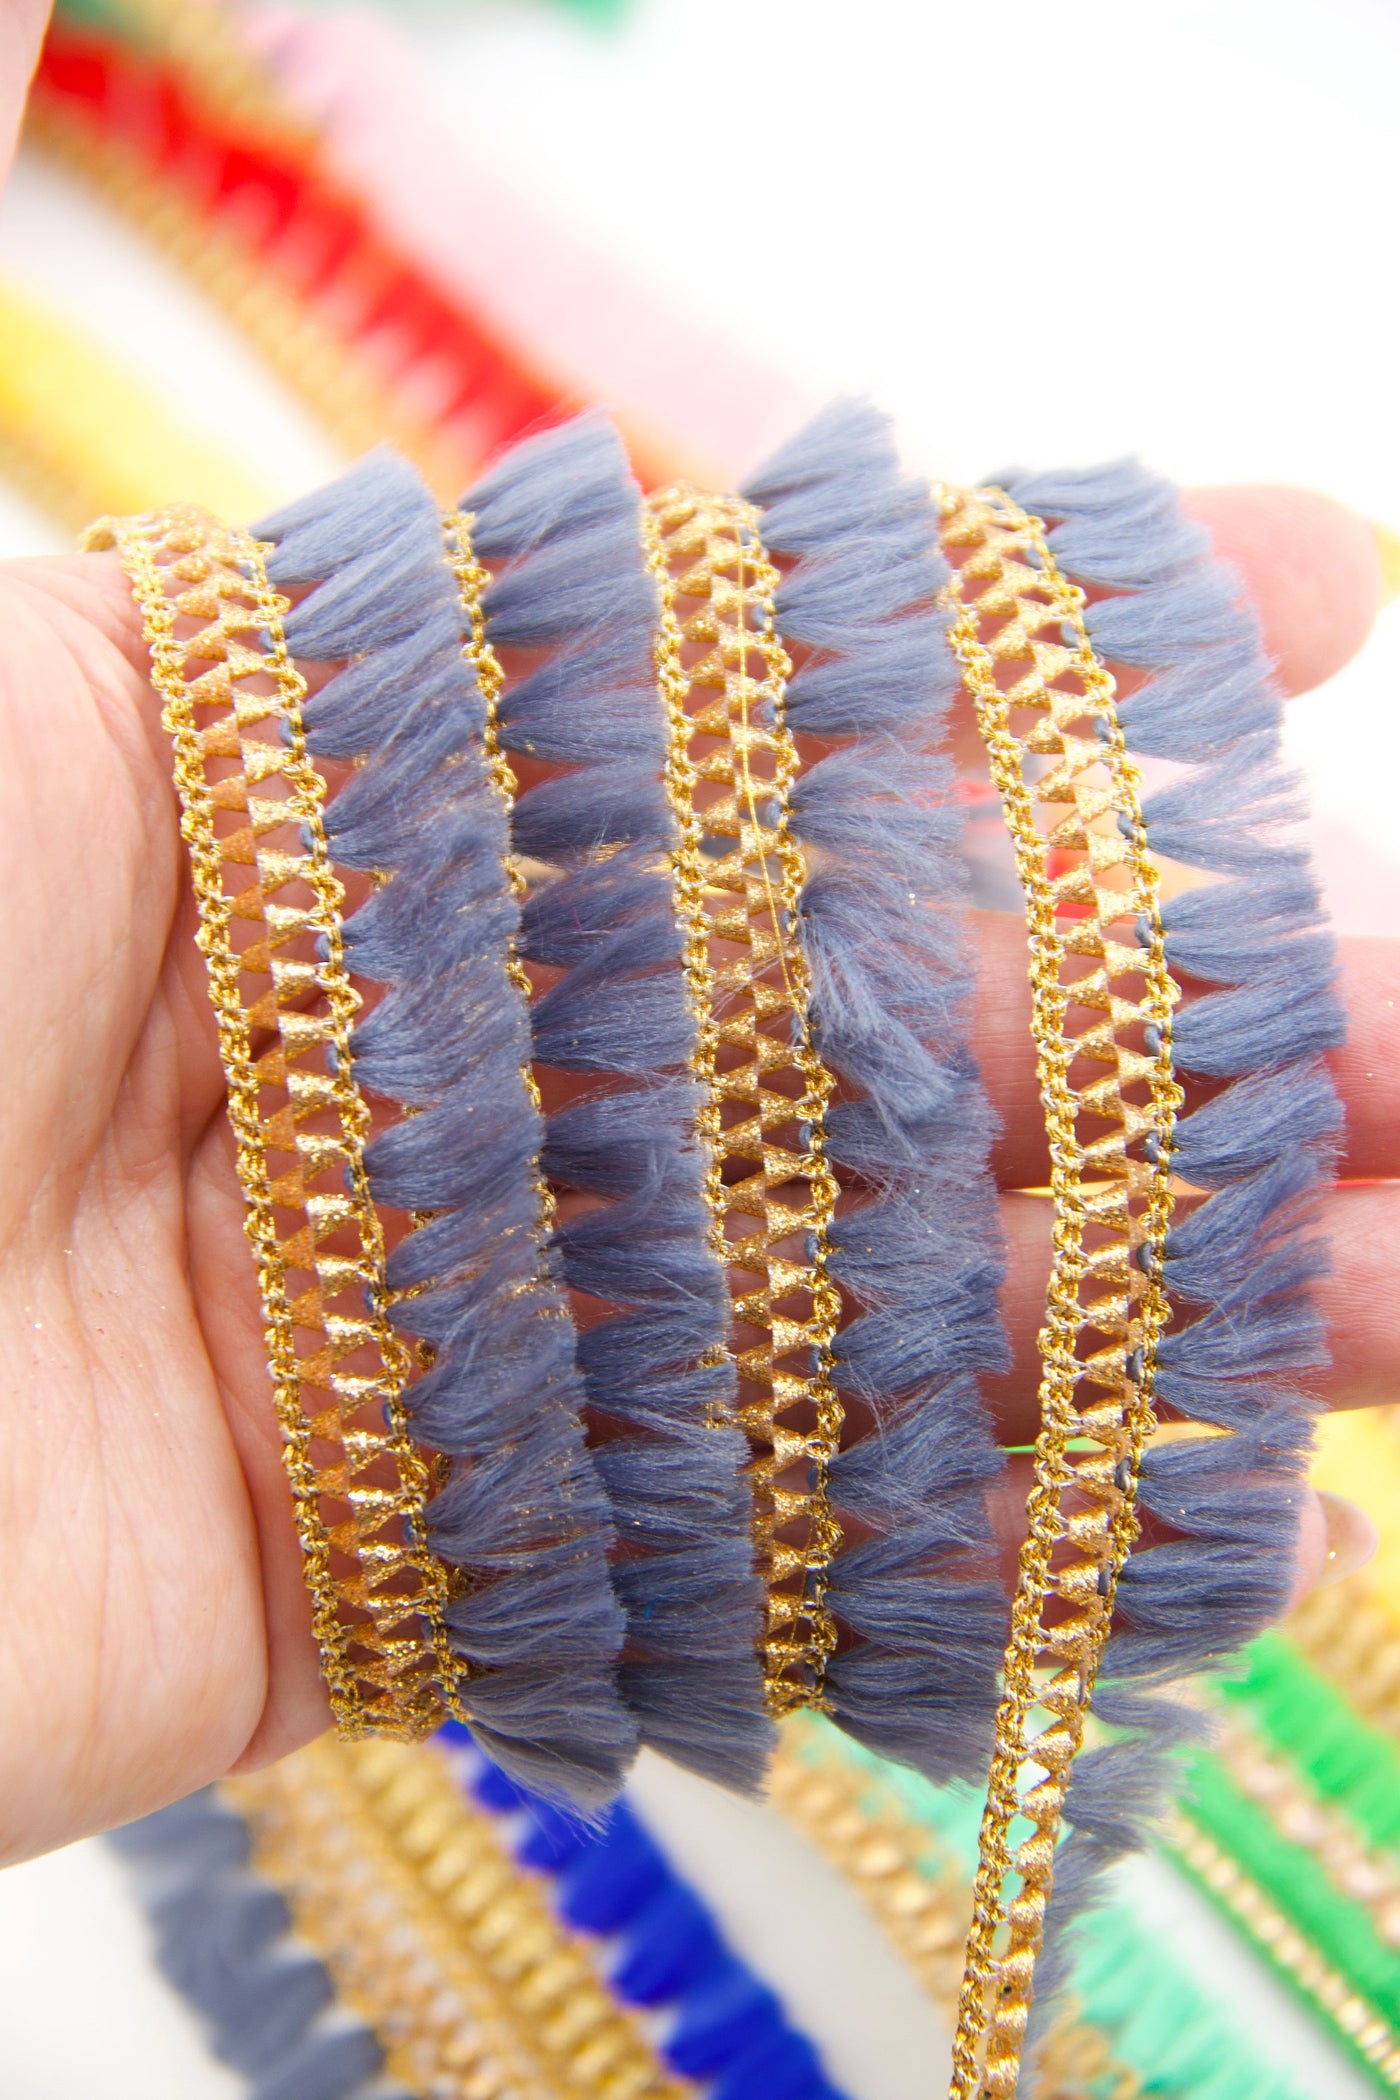 Blue Grey Skinny Indian Ribbon, Holiday Craft or Jewelry Supplies, Tassels and trim, all in one